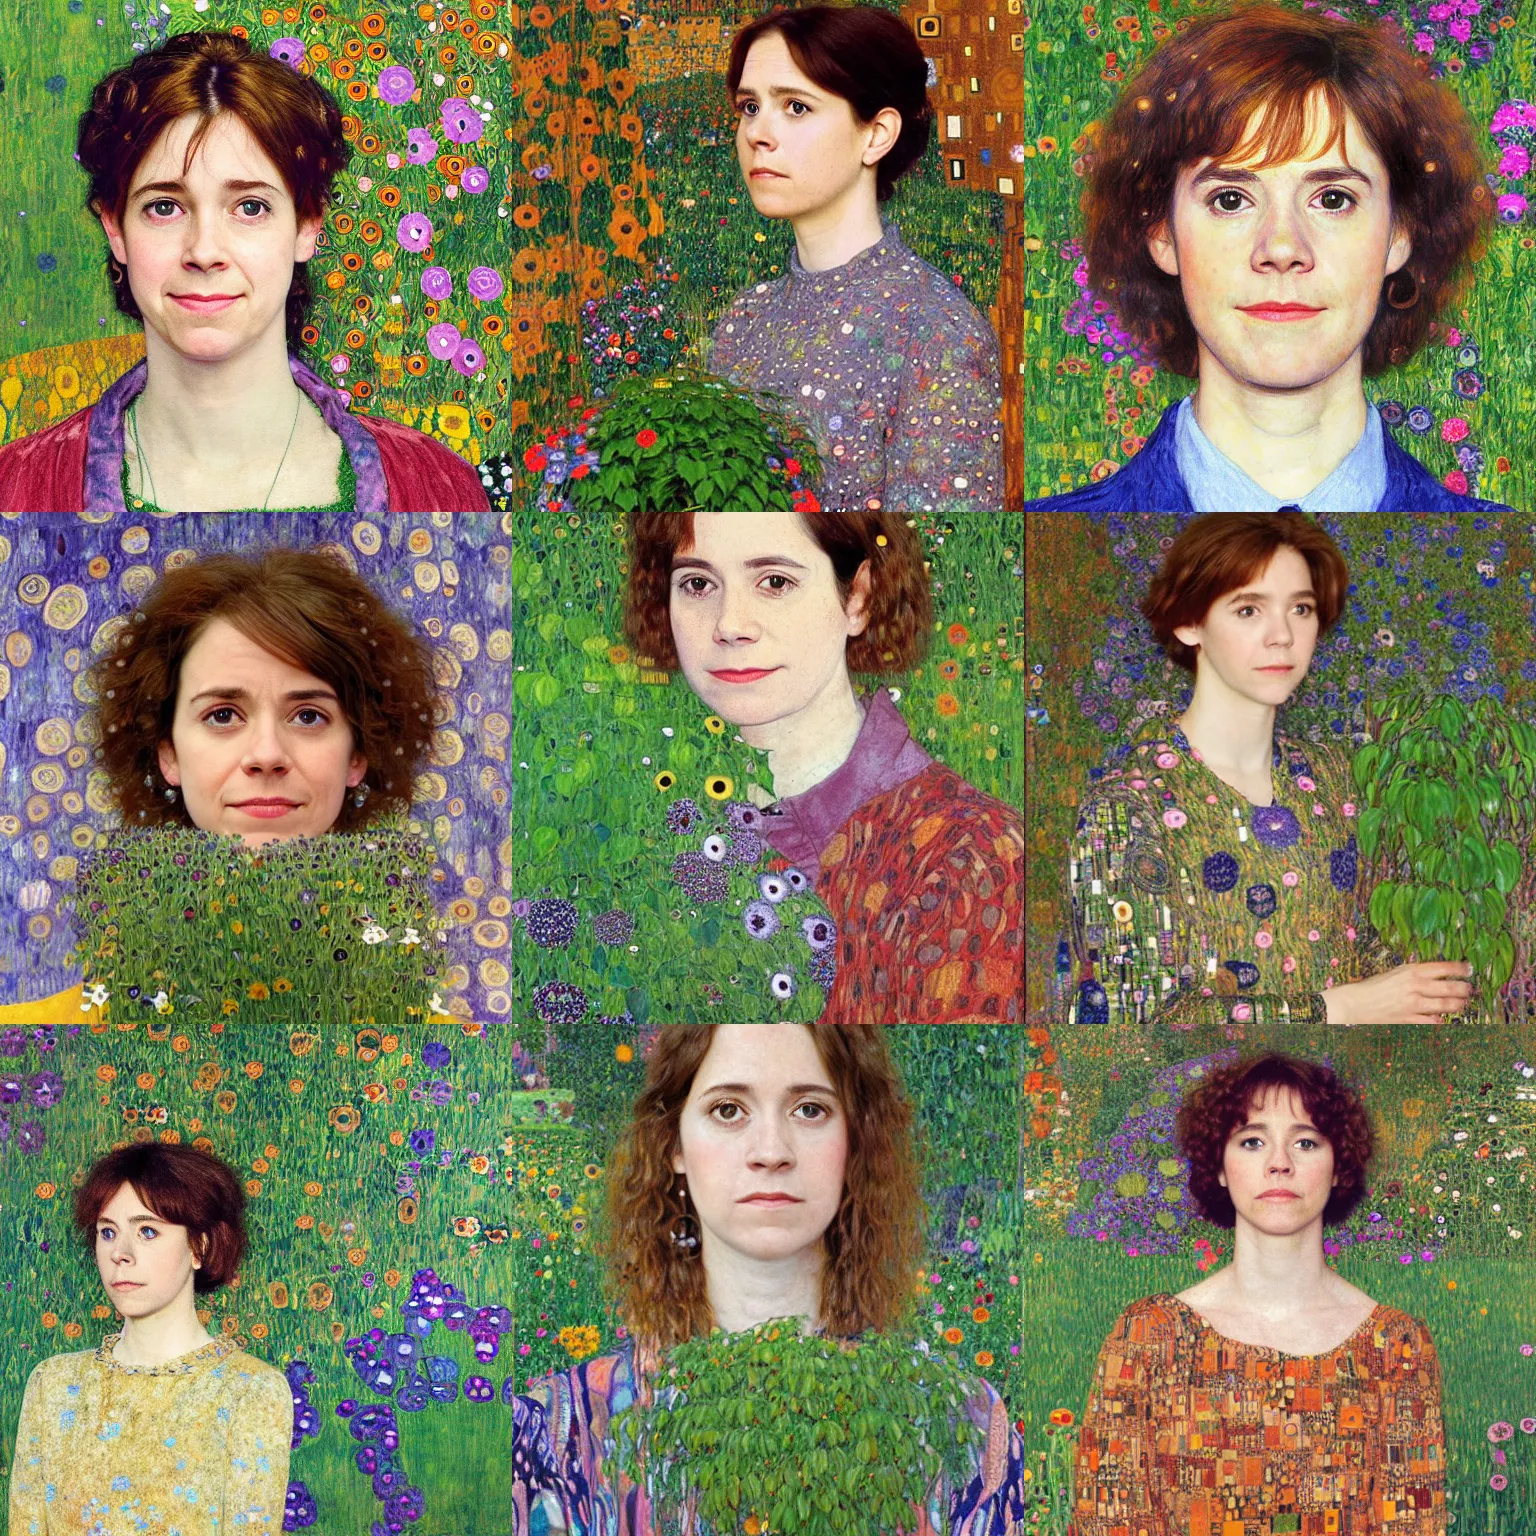 Prompt: a portrait of female asa Butterfield mixed with pam beesly, a slight smile, surrounded by plants, by gustav klimt